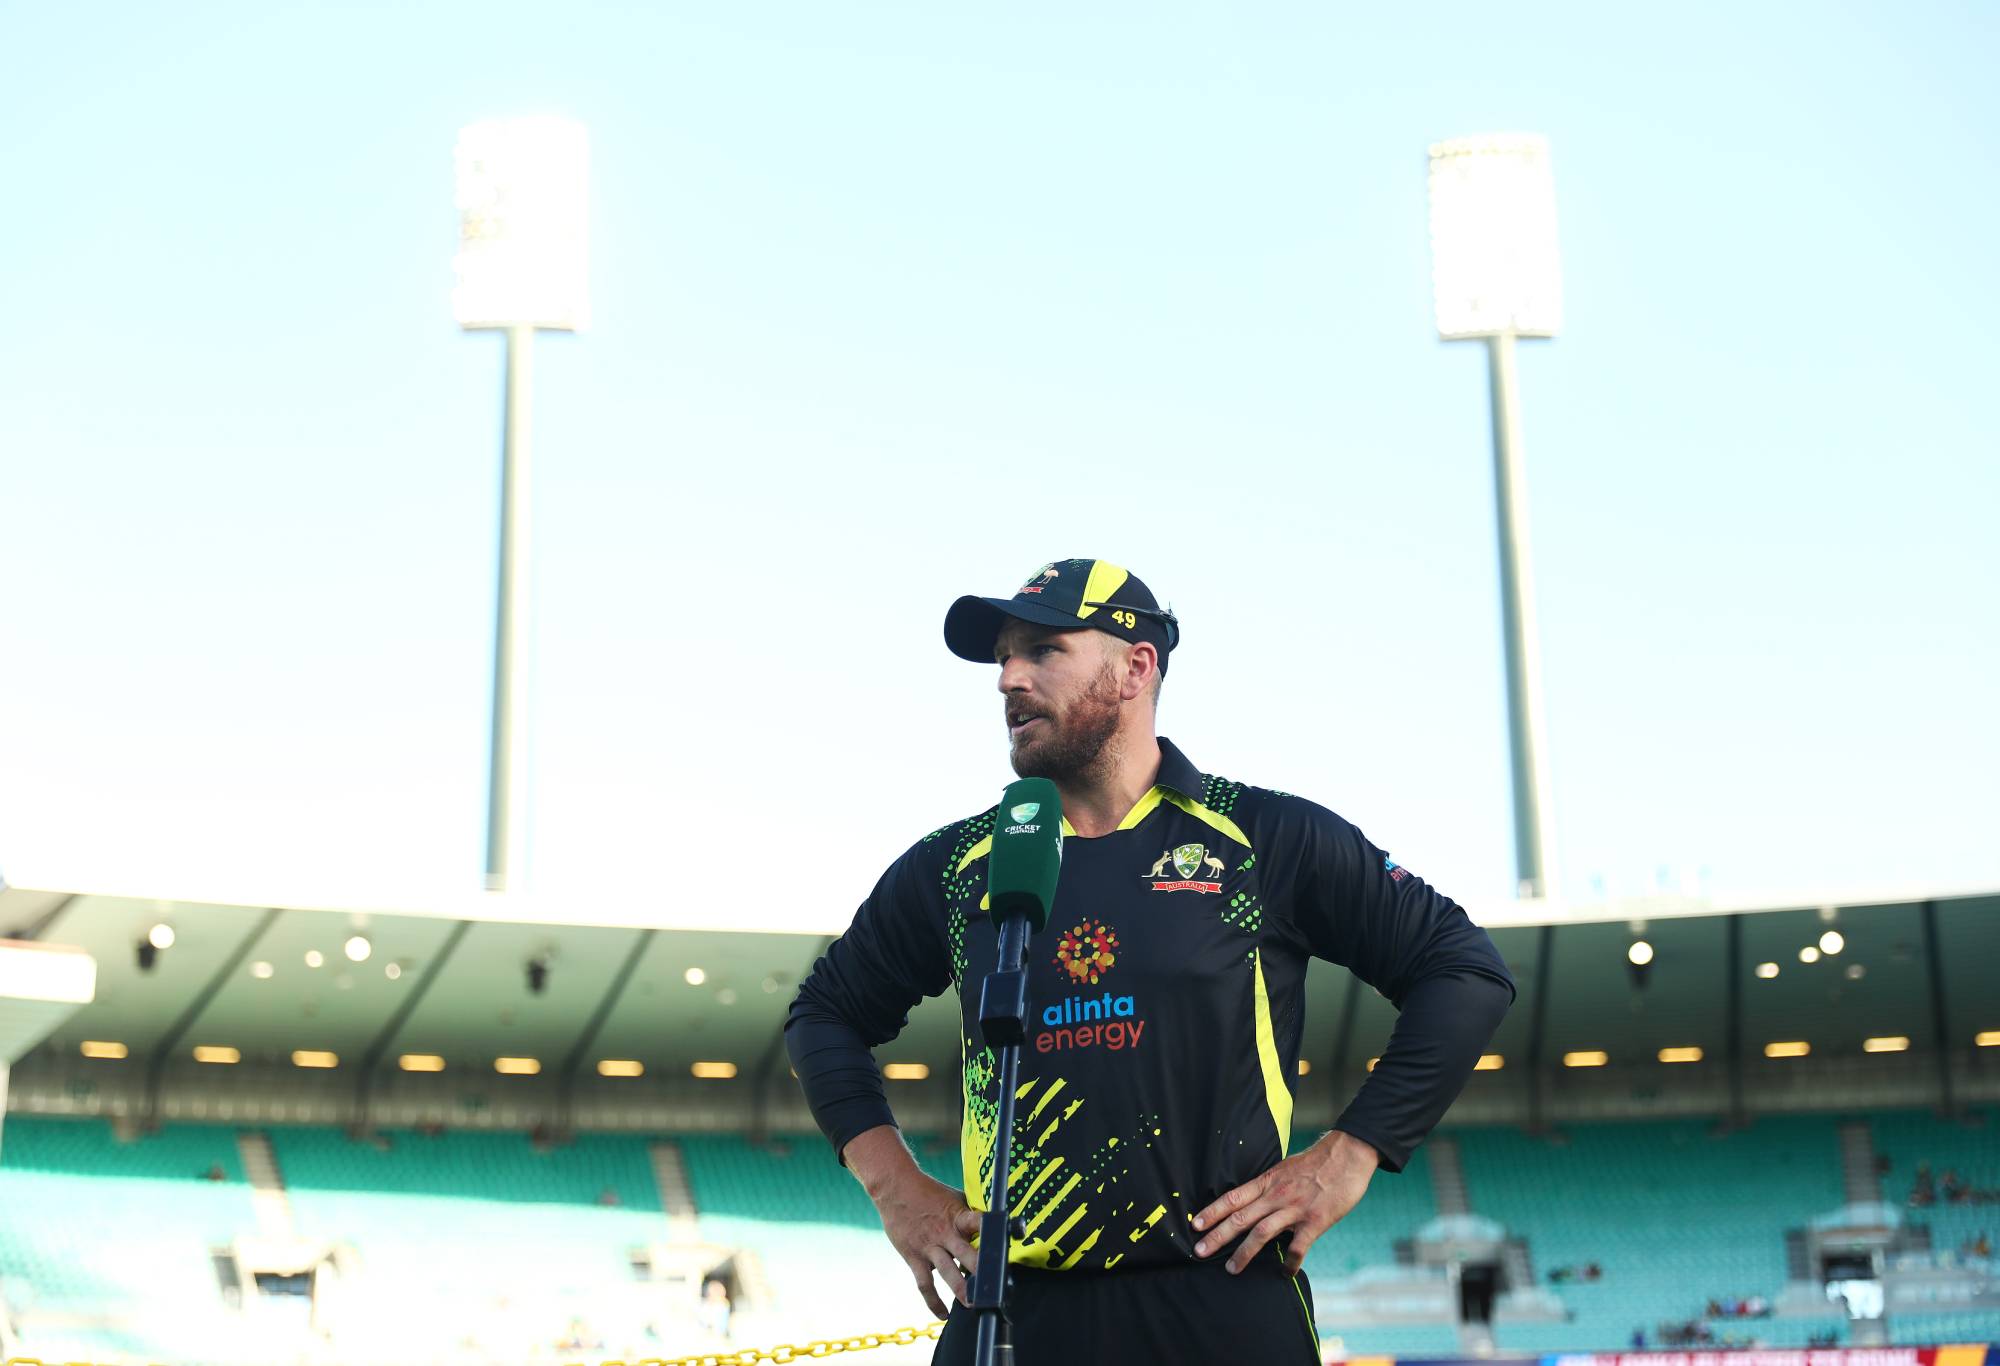 Aaron Finch of Australia is interviewed after the coin toss before game two in the T20 International series between Australia and Sri Lanka at Sydney Cricket Ground on February 13, 2022 in Sydney, Australia. (Photo by Mark Metcalfe - CA/Cricket Australia via Getty Images)